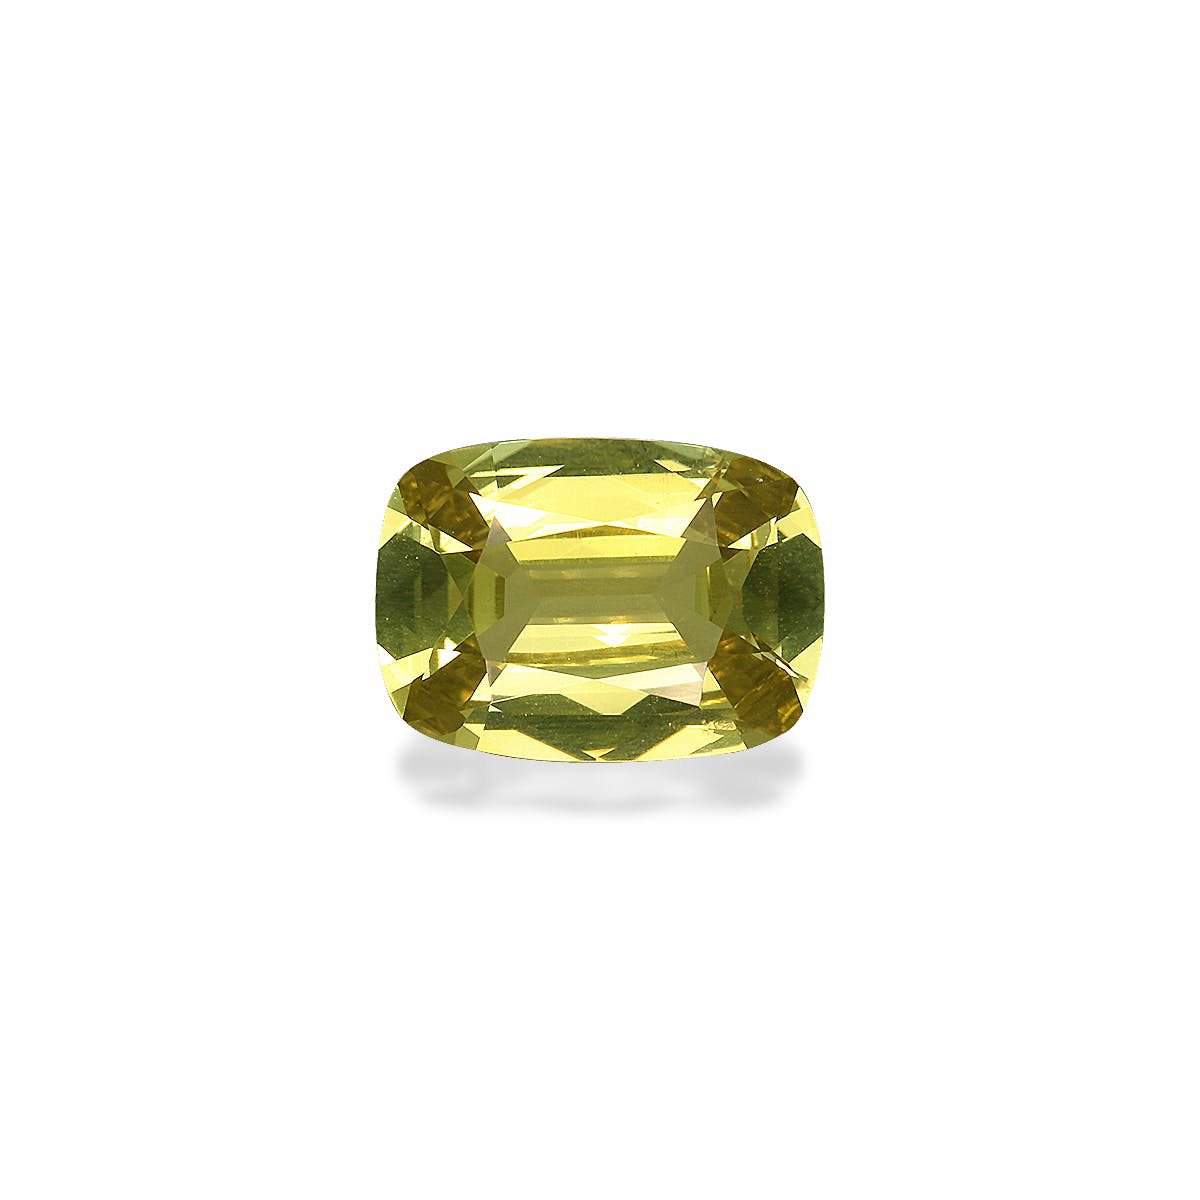 Picture of Golden Yellow Chrysoberyl 2.82ct (CB0146)